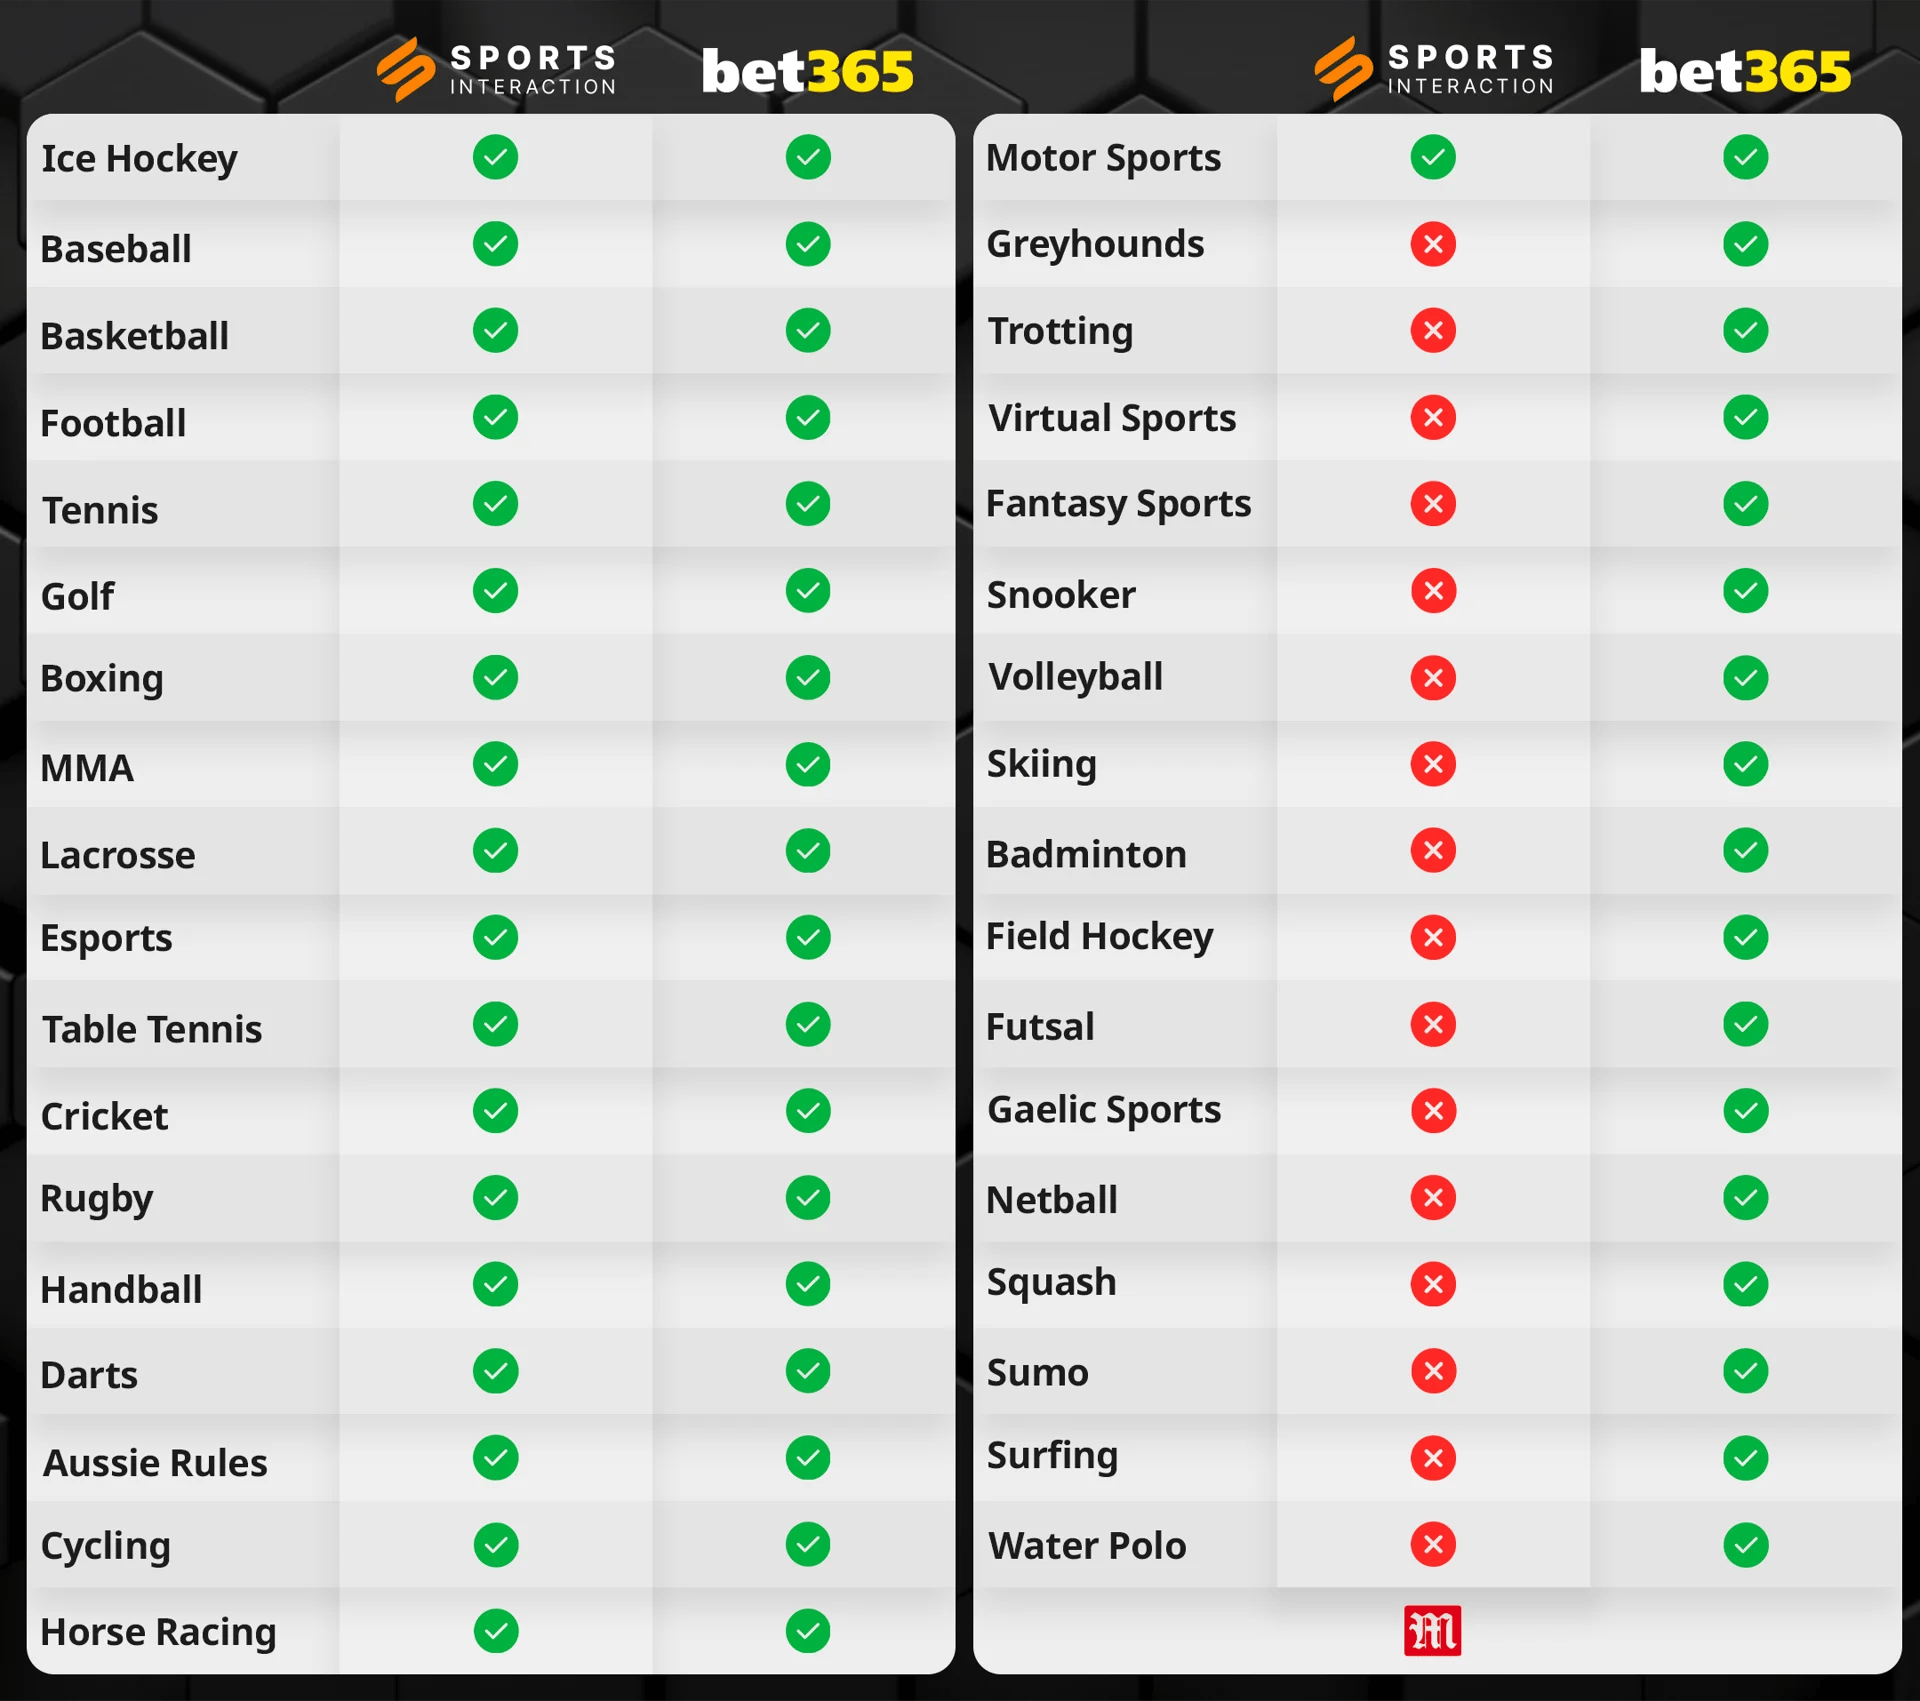 Bet365 vs Sports Interaction - Sports coverage